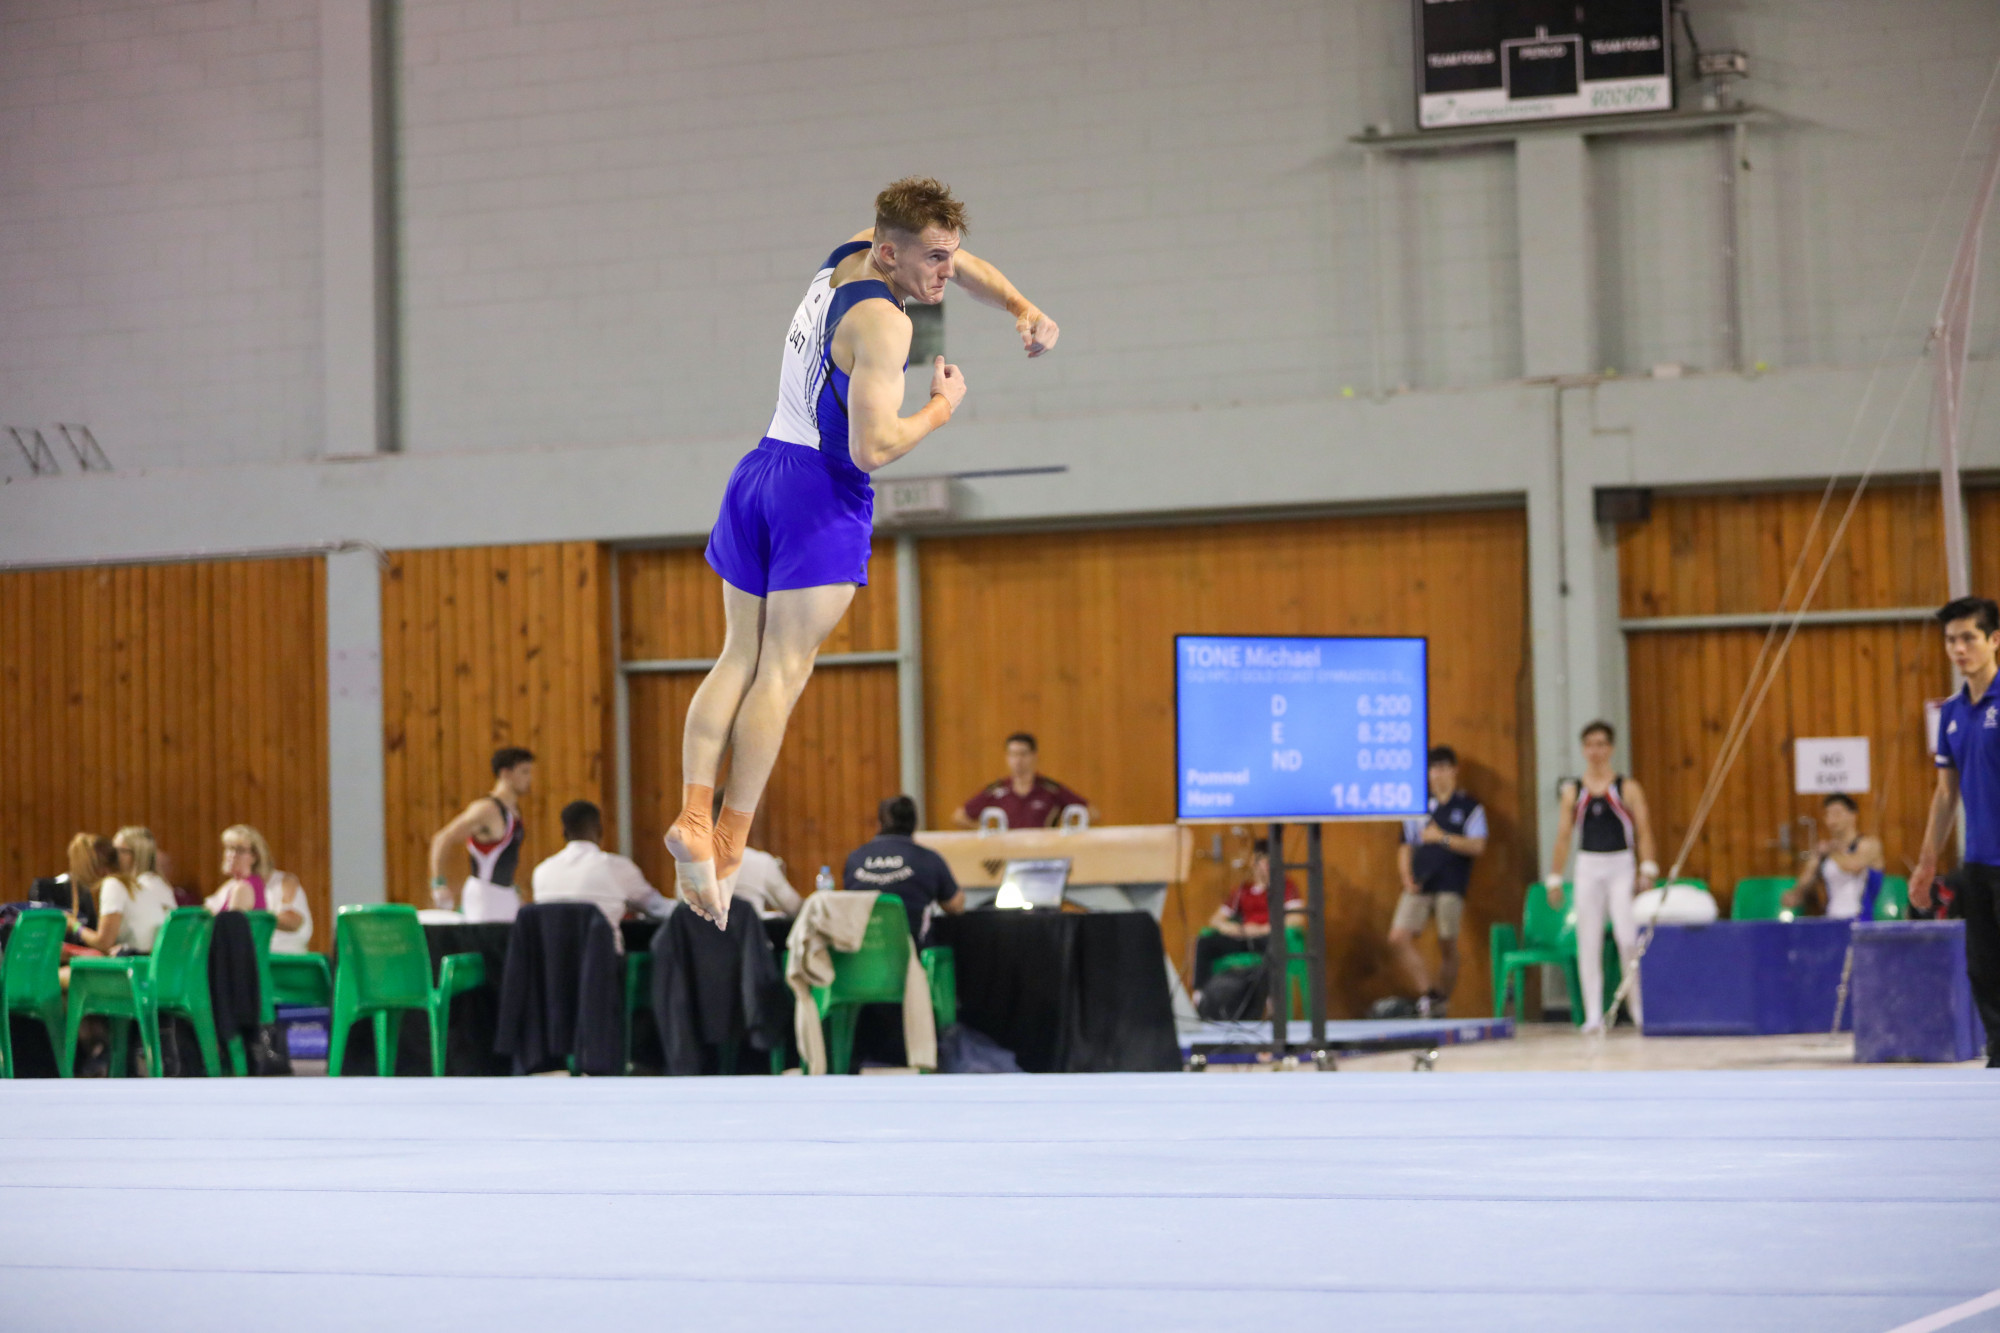 Mareeba local Callum McCarthy has smashed into the recent Queensland Gymnastics State Championships placing first in two of his events.